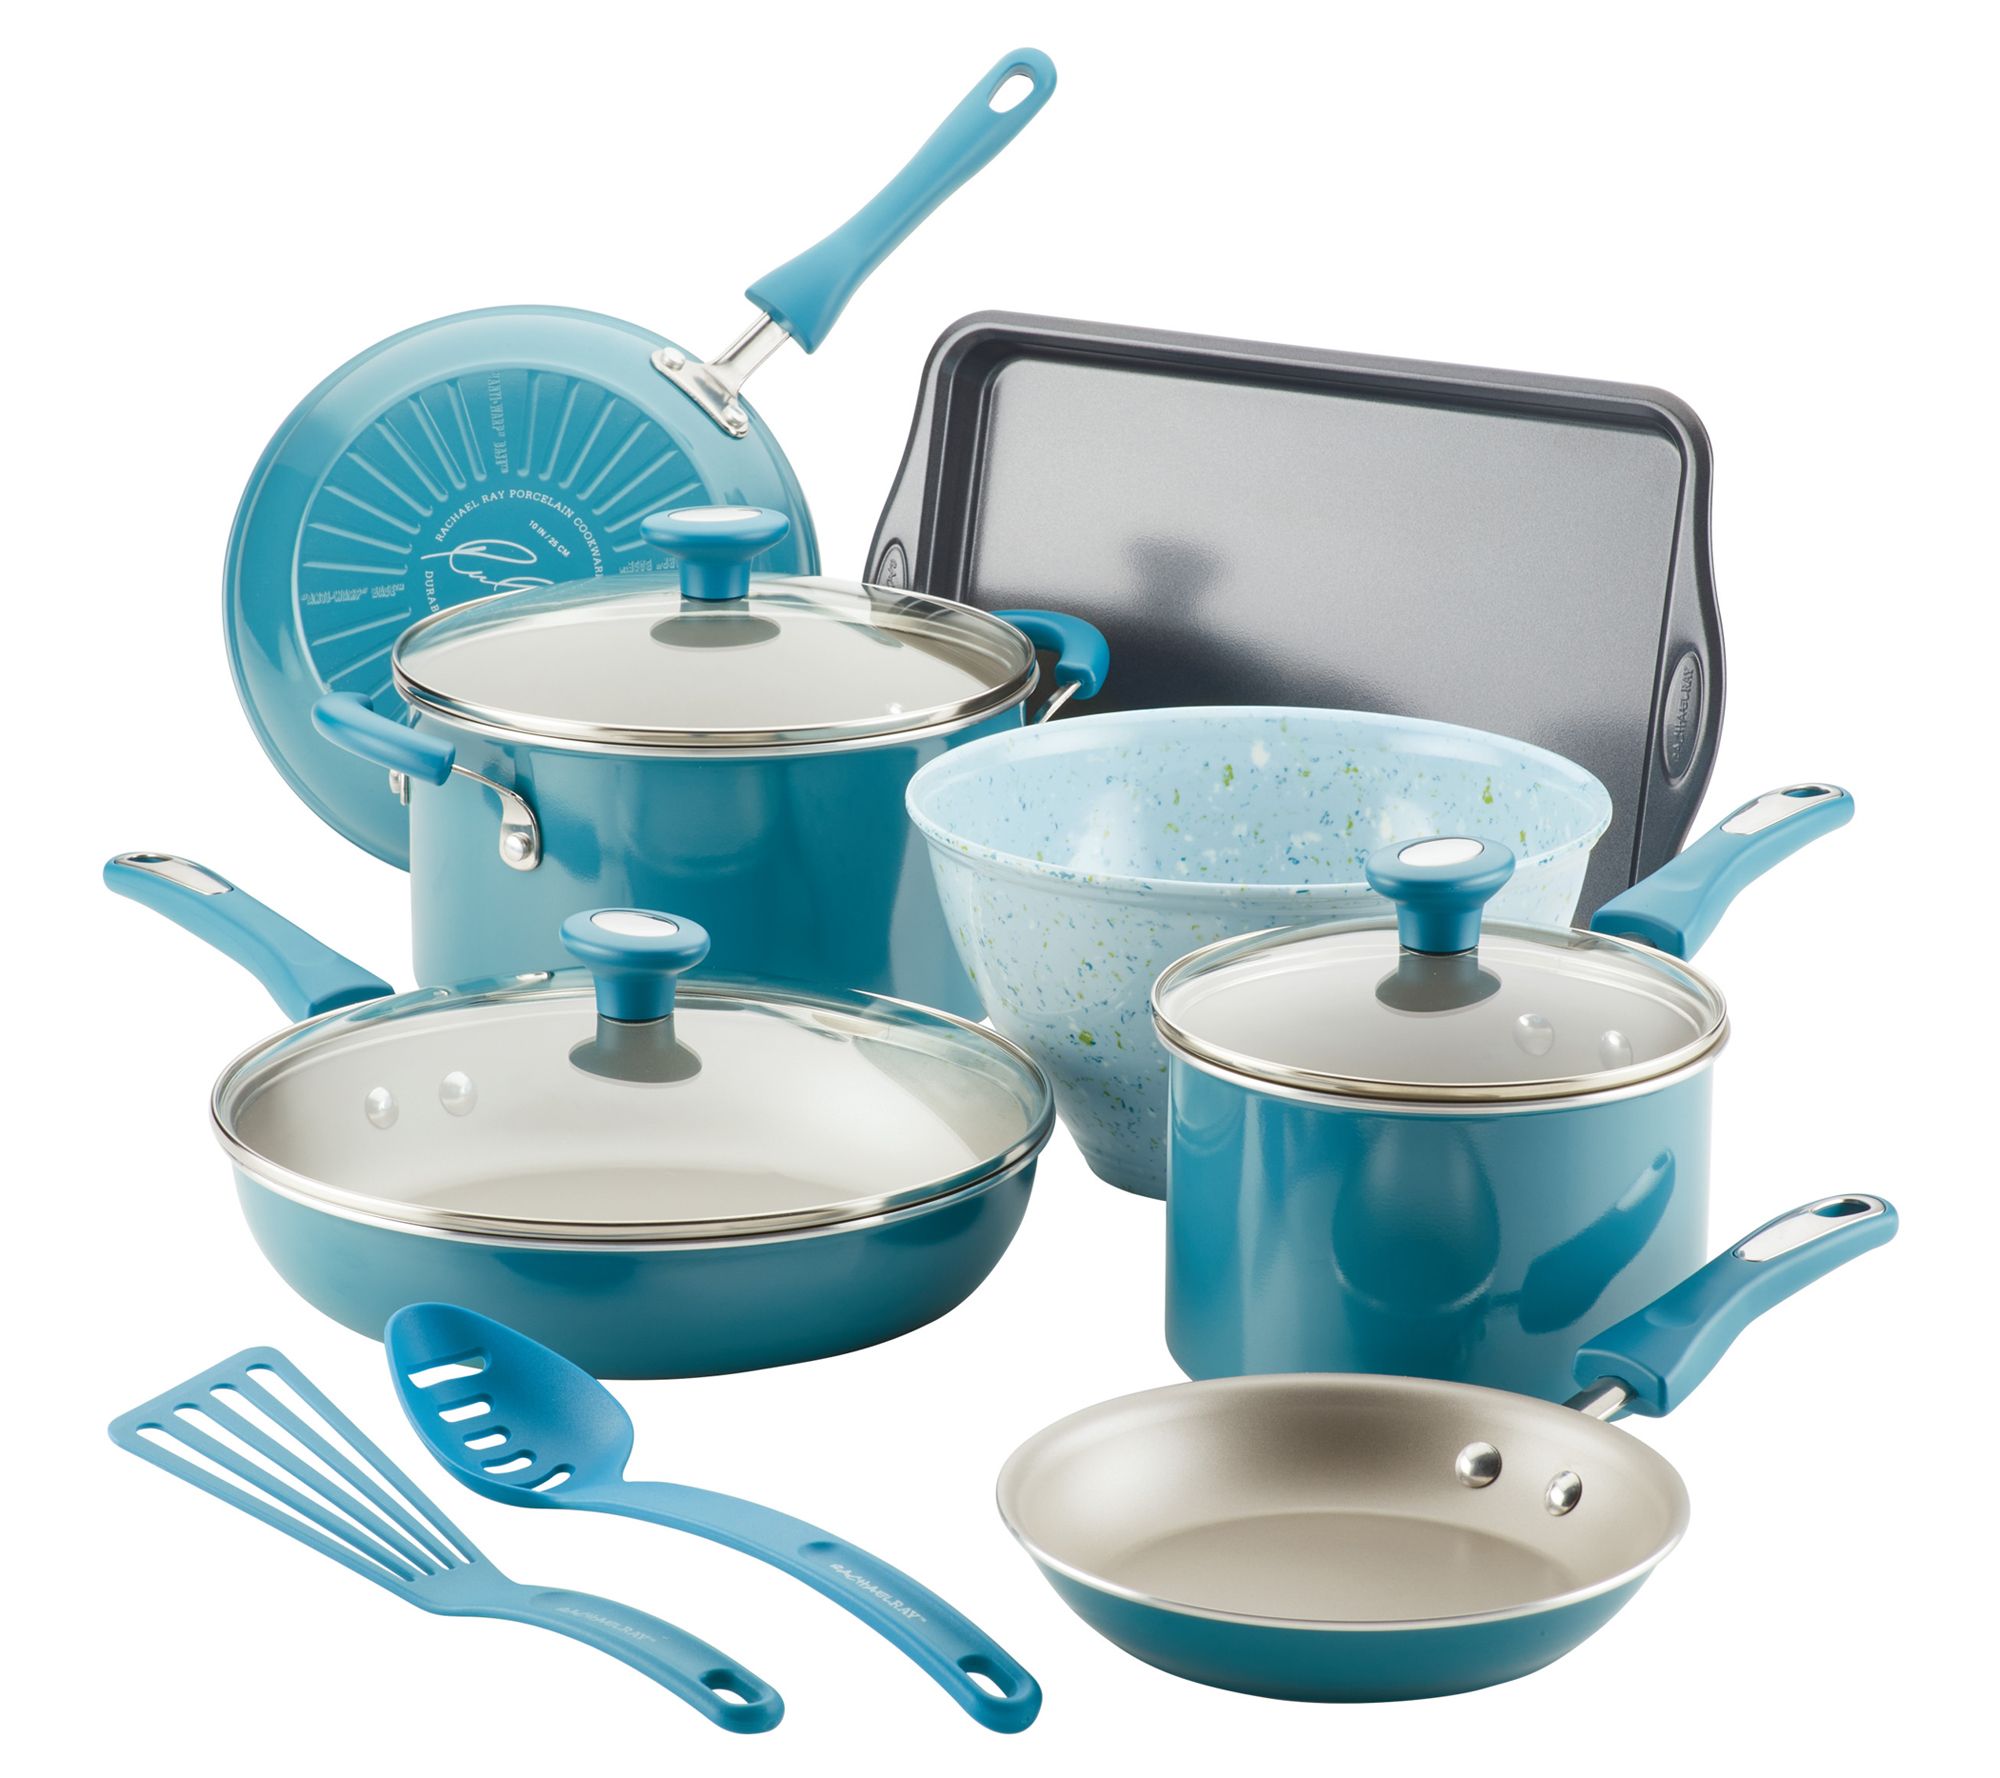 Rachael Ray Cucina Hard Anodized Nonstick Cookware Pots and Pans Set, 12  Piece, Gray with Blue Handles